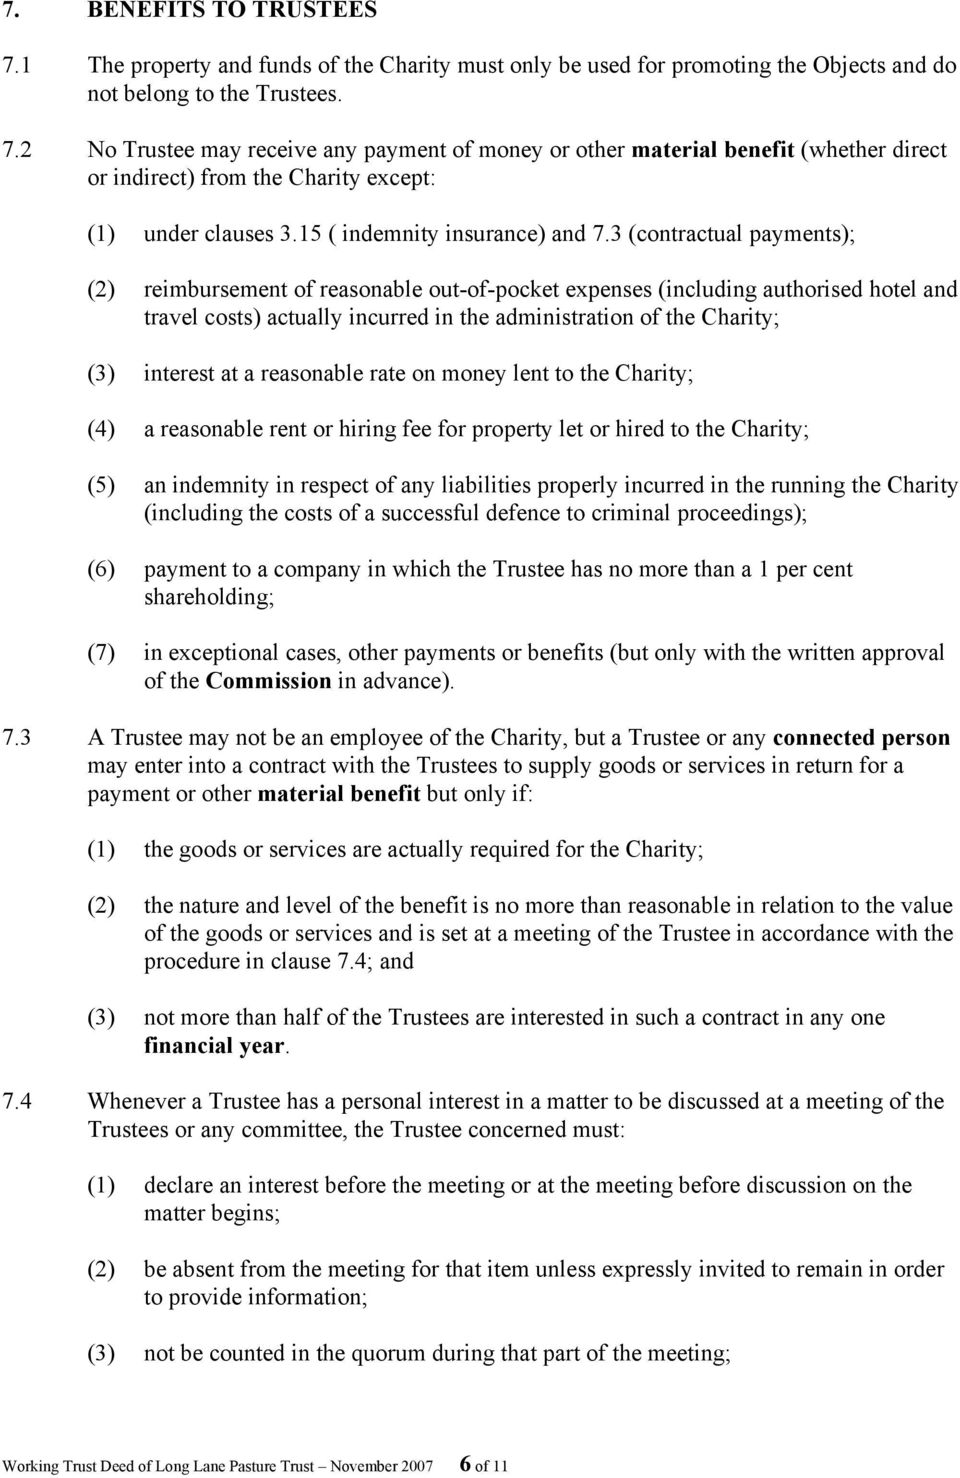 3 (contractual payments); (2) reimbursement of reasonable out-of-pocket expenses (including authorised hotel and travel costs) actually incurred in the administration of the Charity; (3) interest at